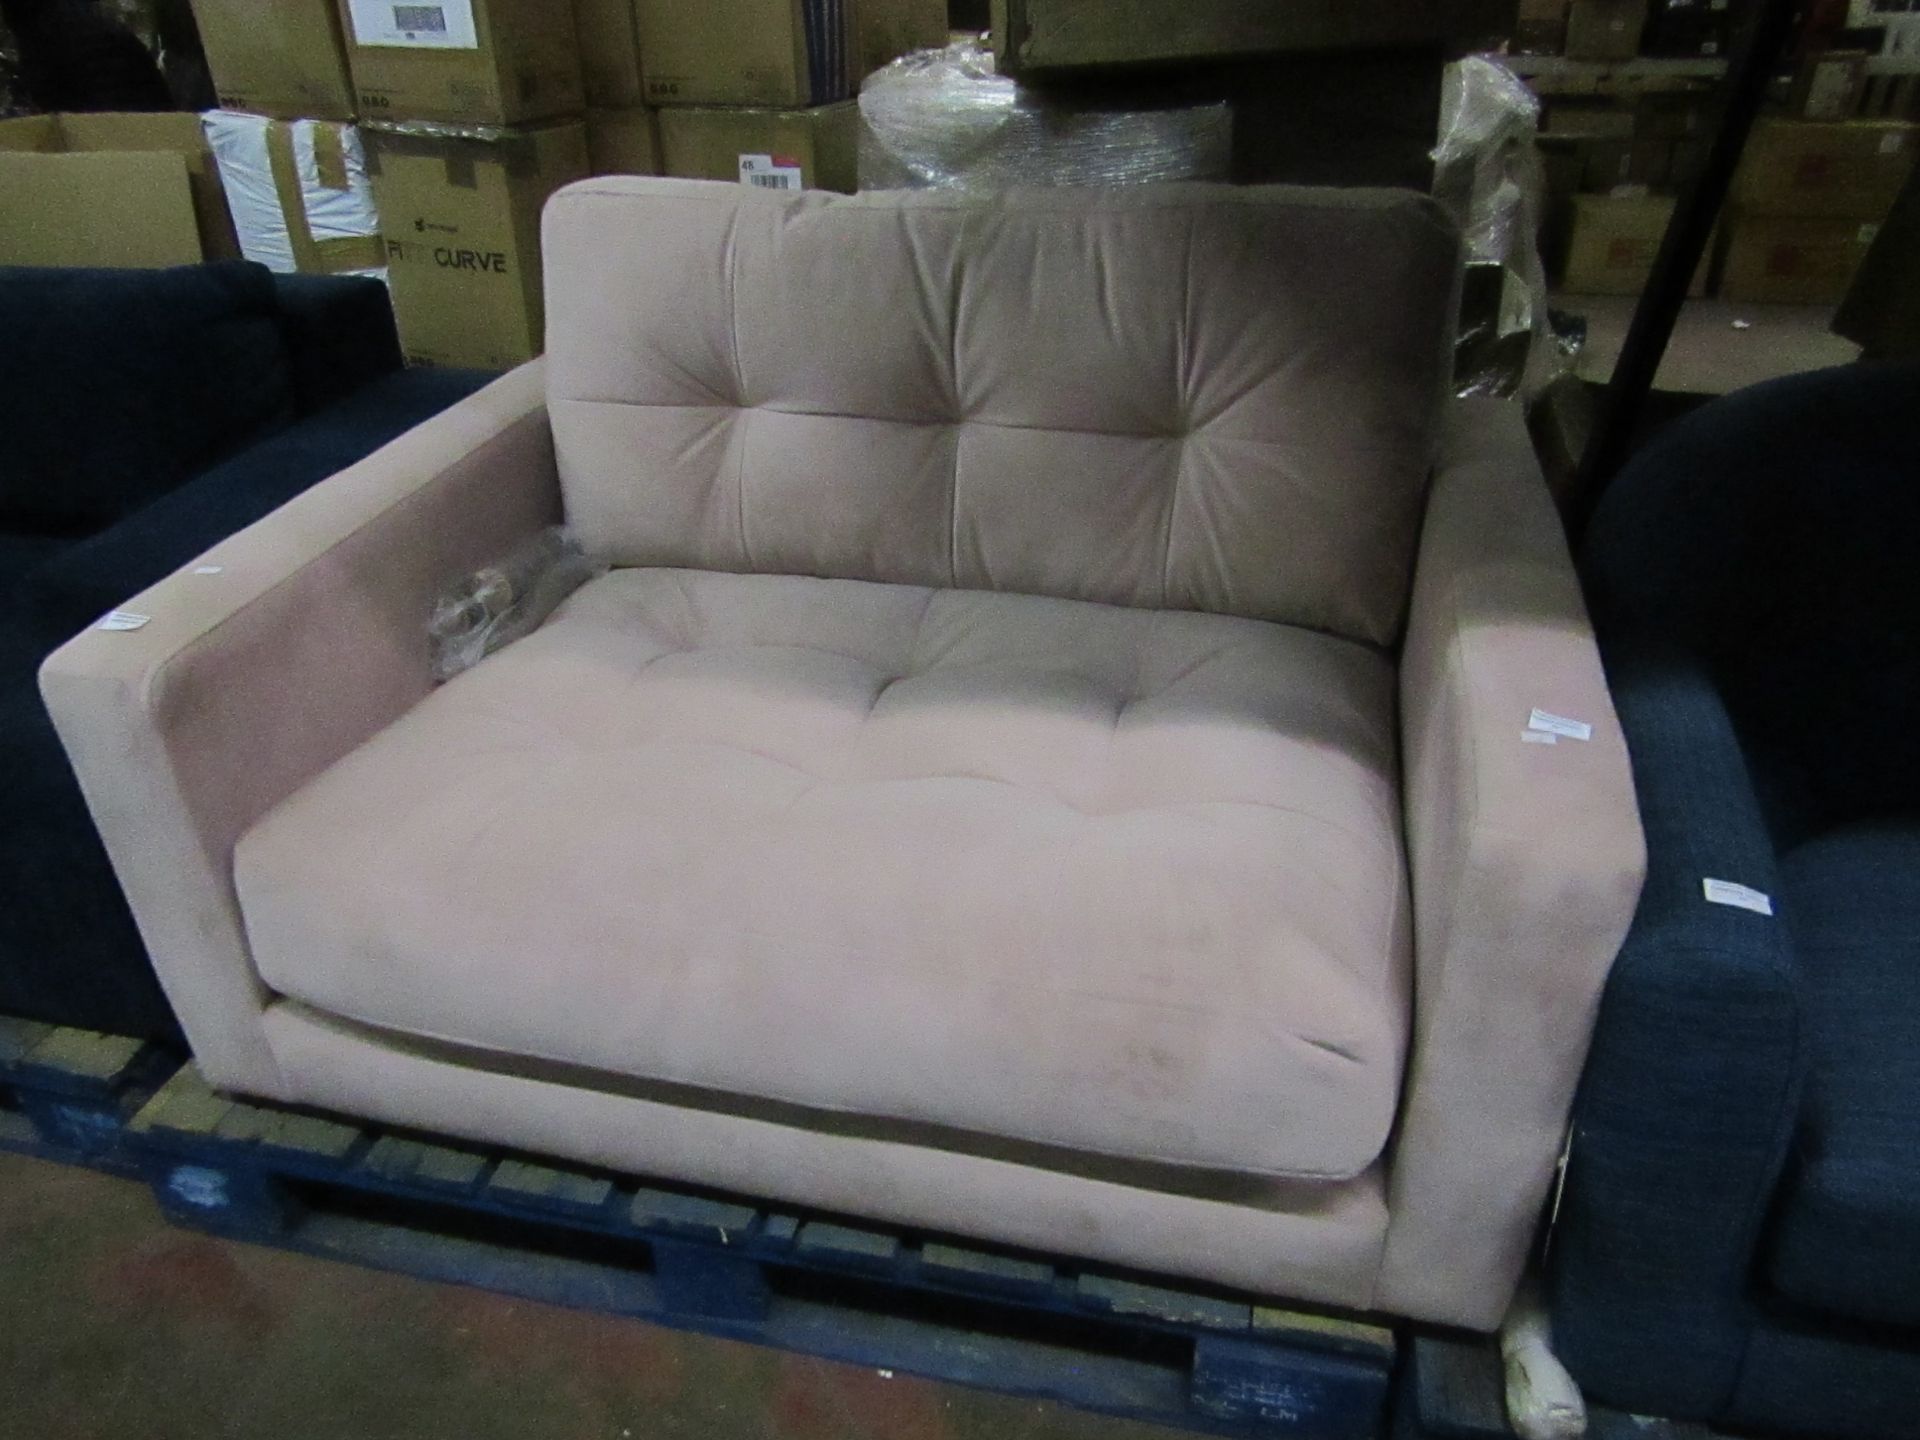 | 1X | SWOON PINK VELVET SMALL LOVE SEAT | (PLEASE NOTE, THIS DOES NOT PROVIDE ANY WARRANTY OR